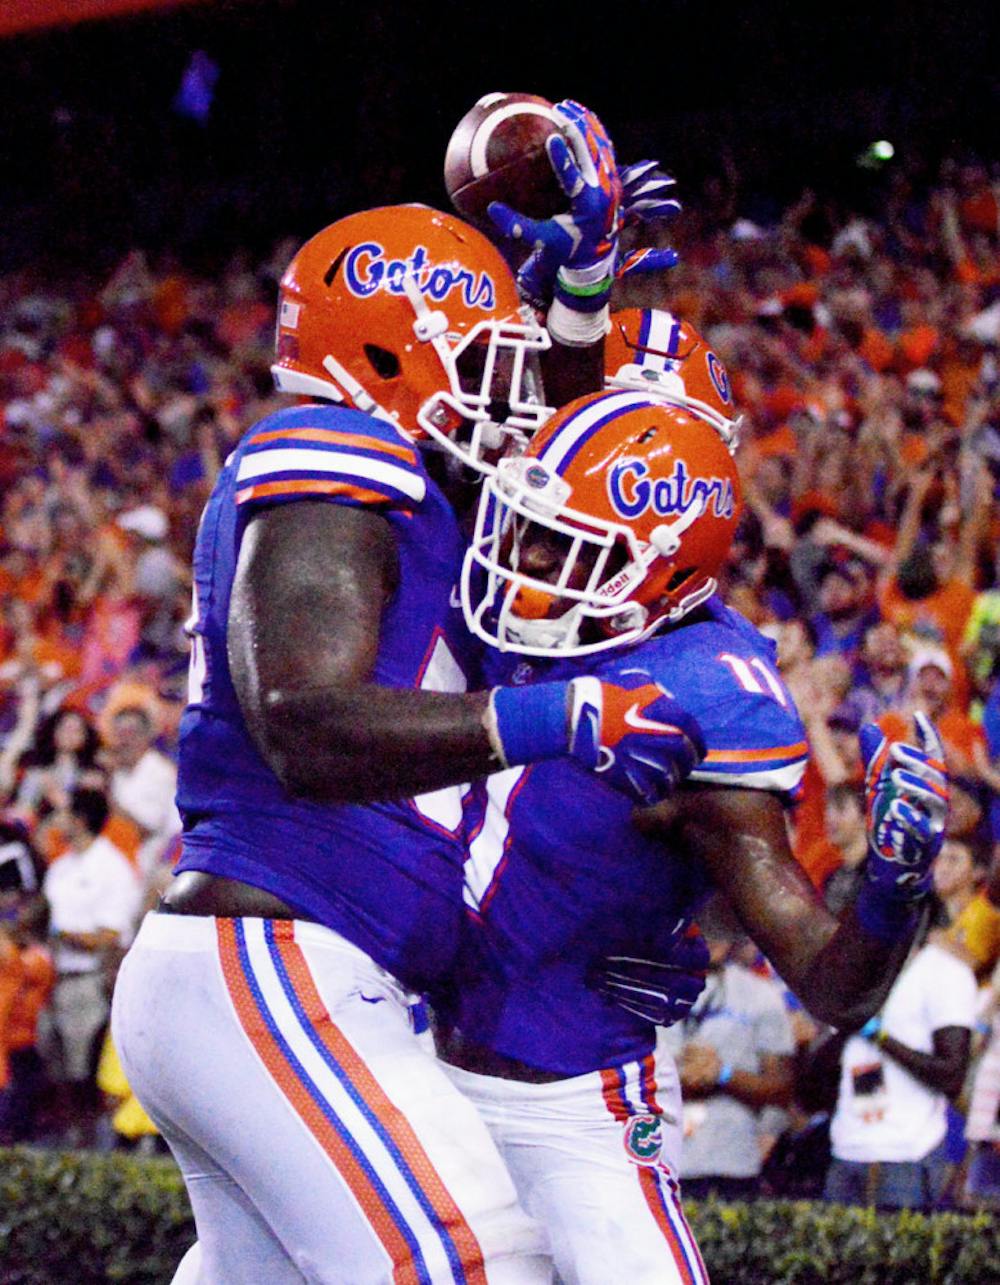 <p>Teammates celebrate a touchdown with sophomore wide receiver Demarcus Robinson (11) during Florida's 36-30 overtime victory against Kentucky on Saturday at Ben Hill Griffin Stadium.</p>